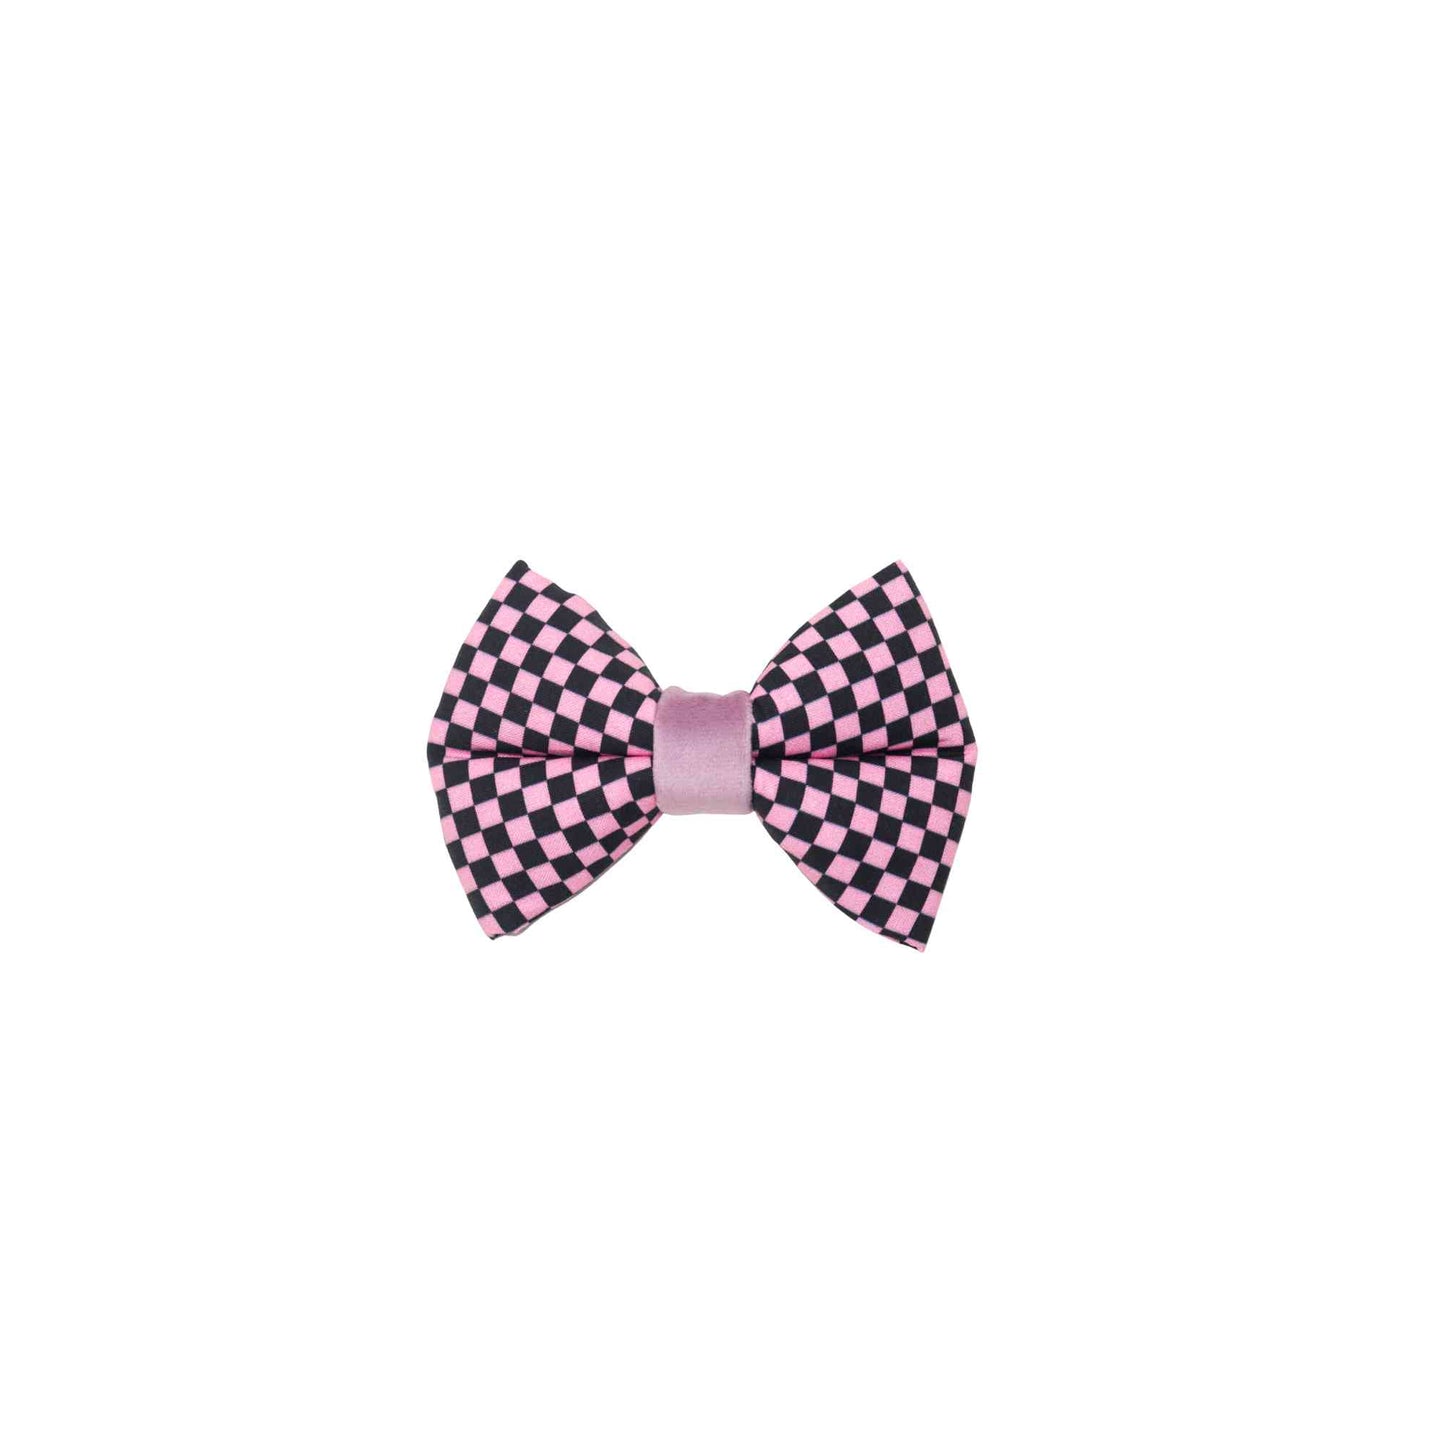 "Pink Robin" Puffy Bow Tie